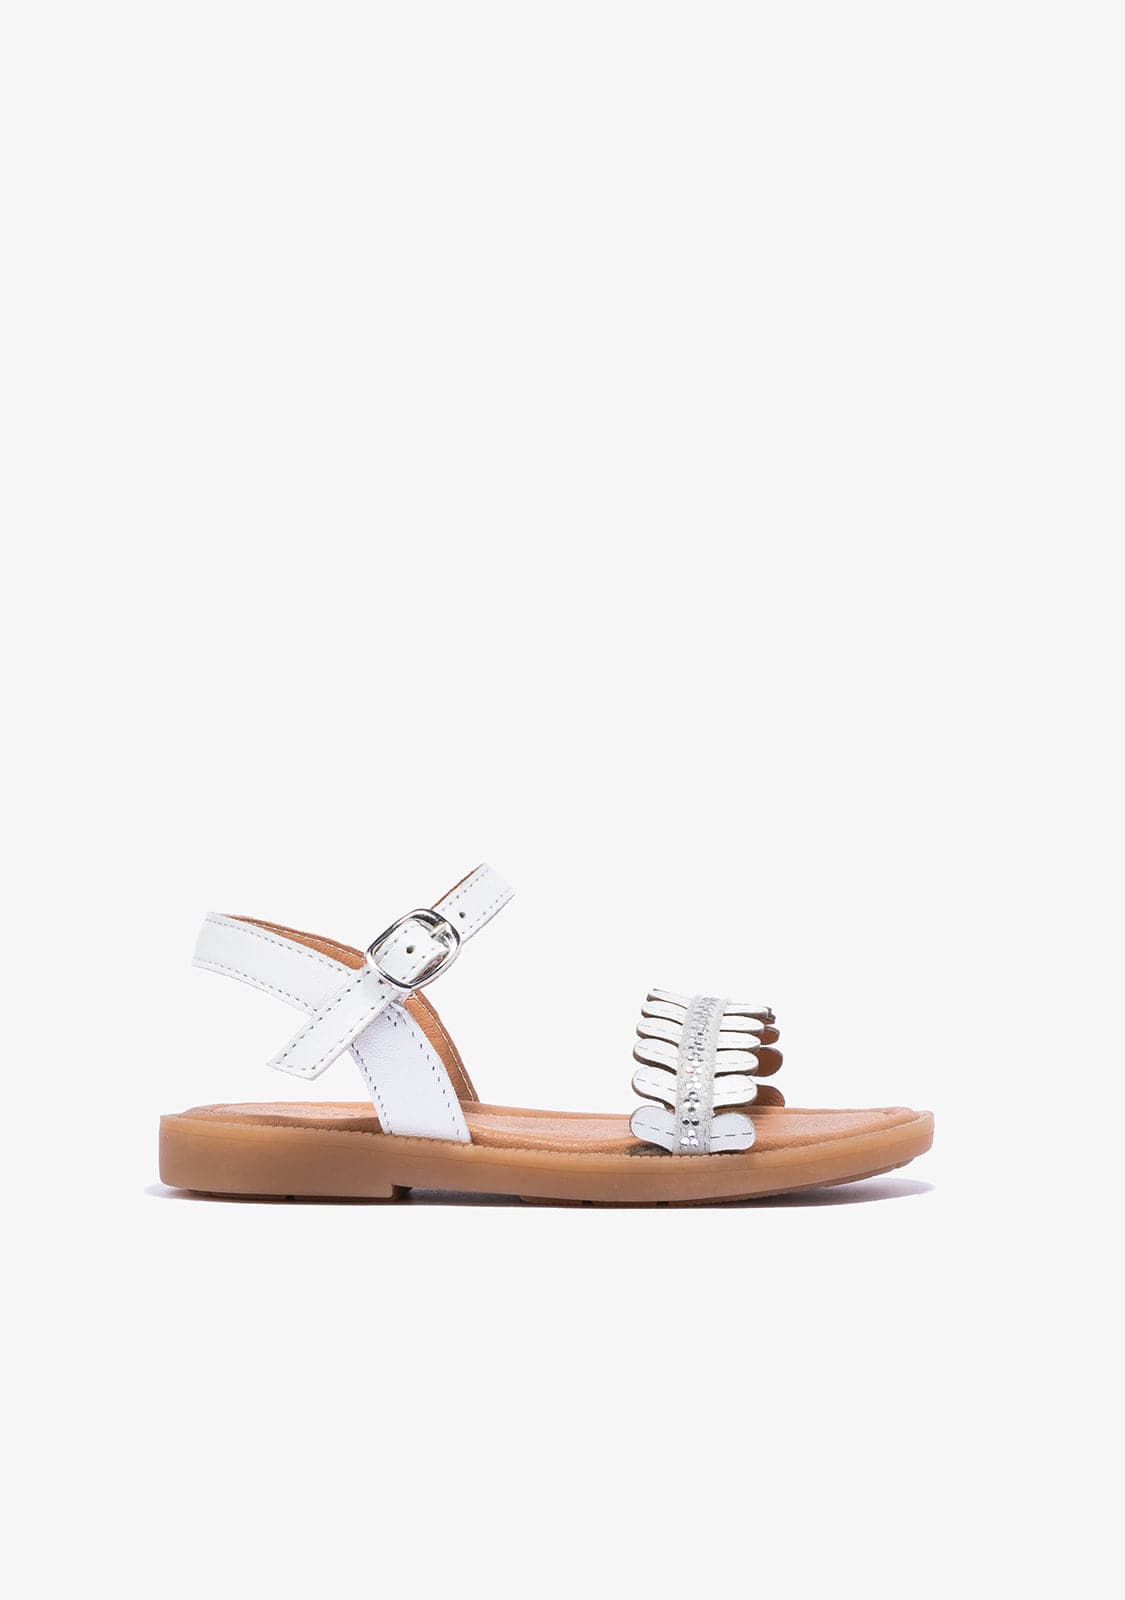 CONGUITOS Shoes Girl's White Buckle Strass Sandals Napa